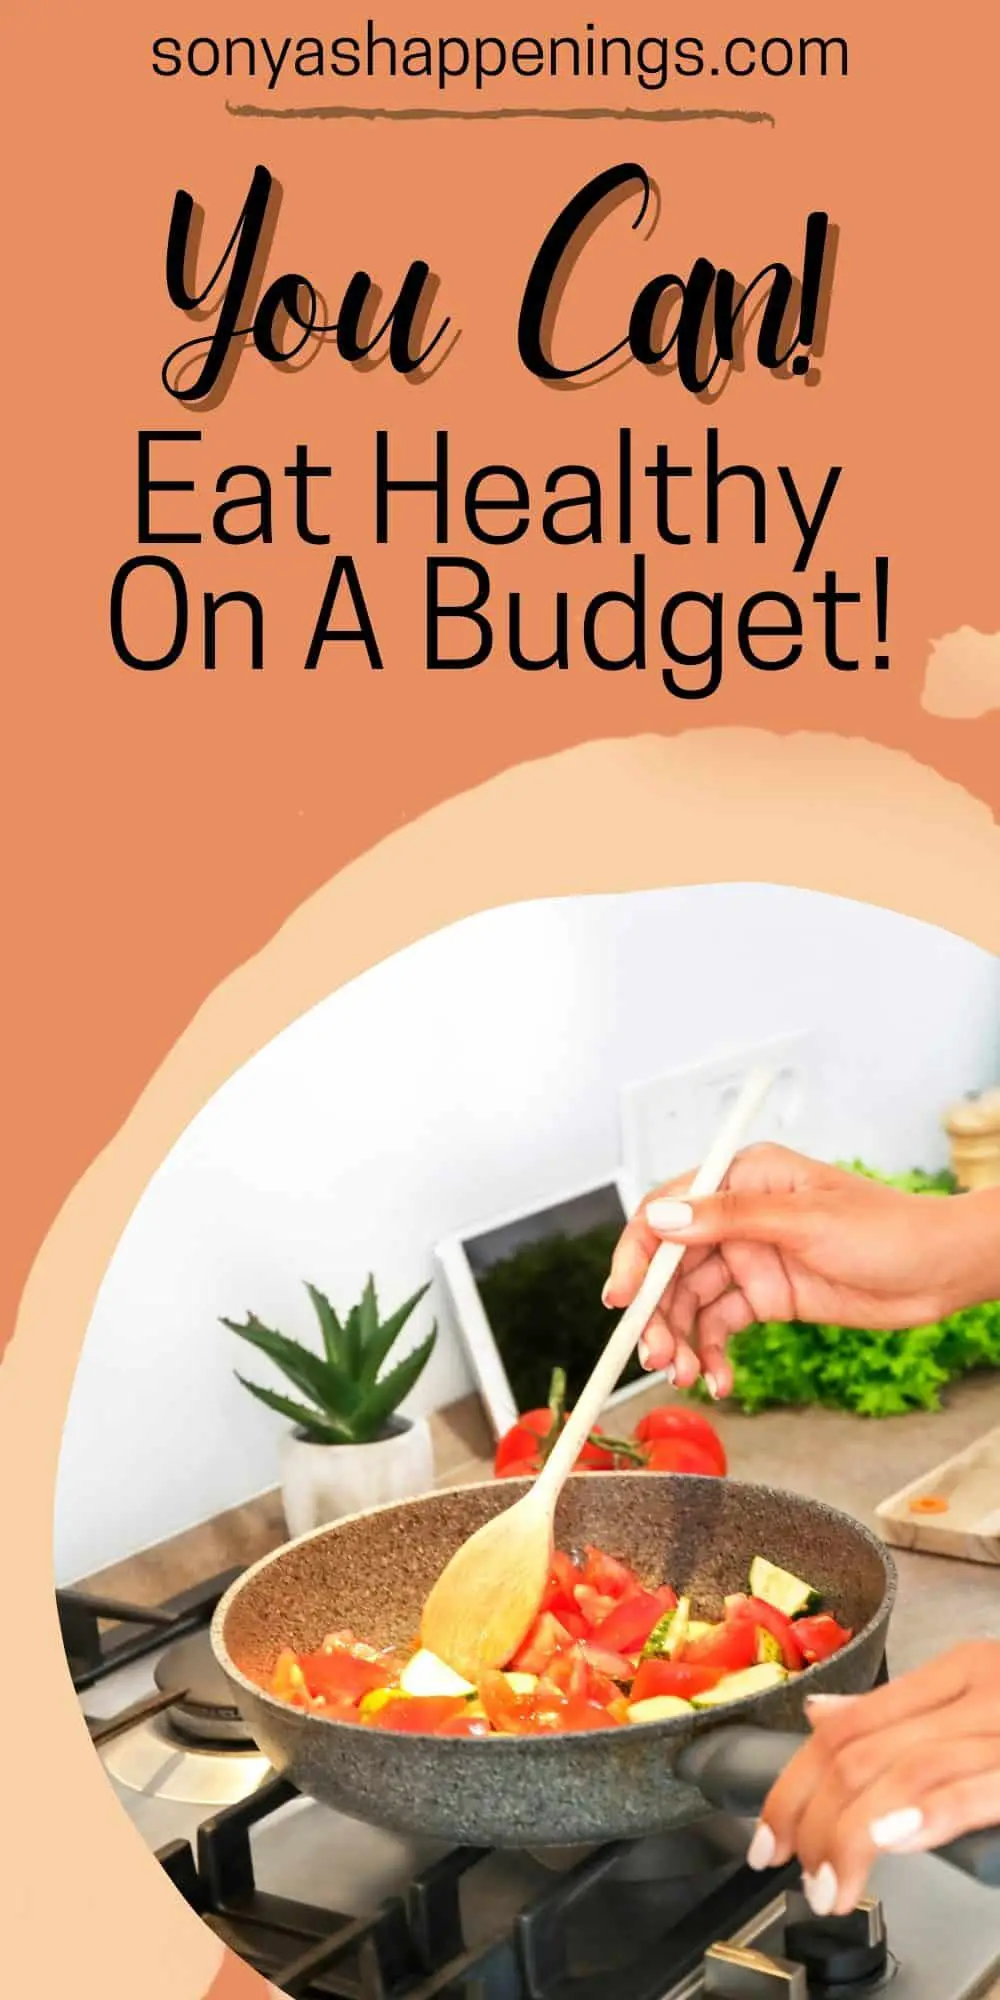 Healthy Eating On A Budget Done Easily!